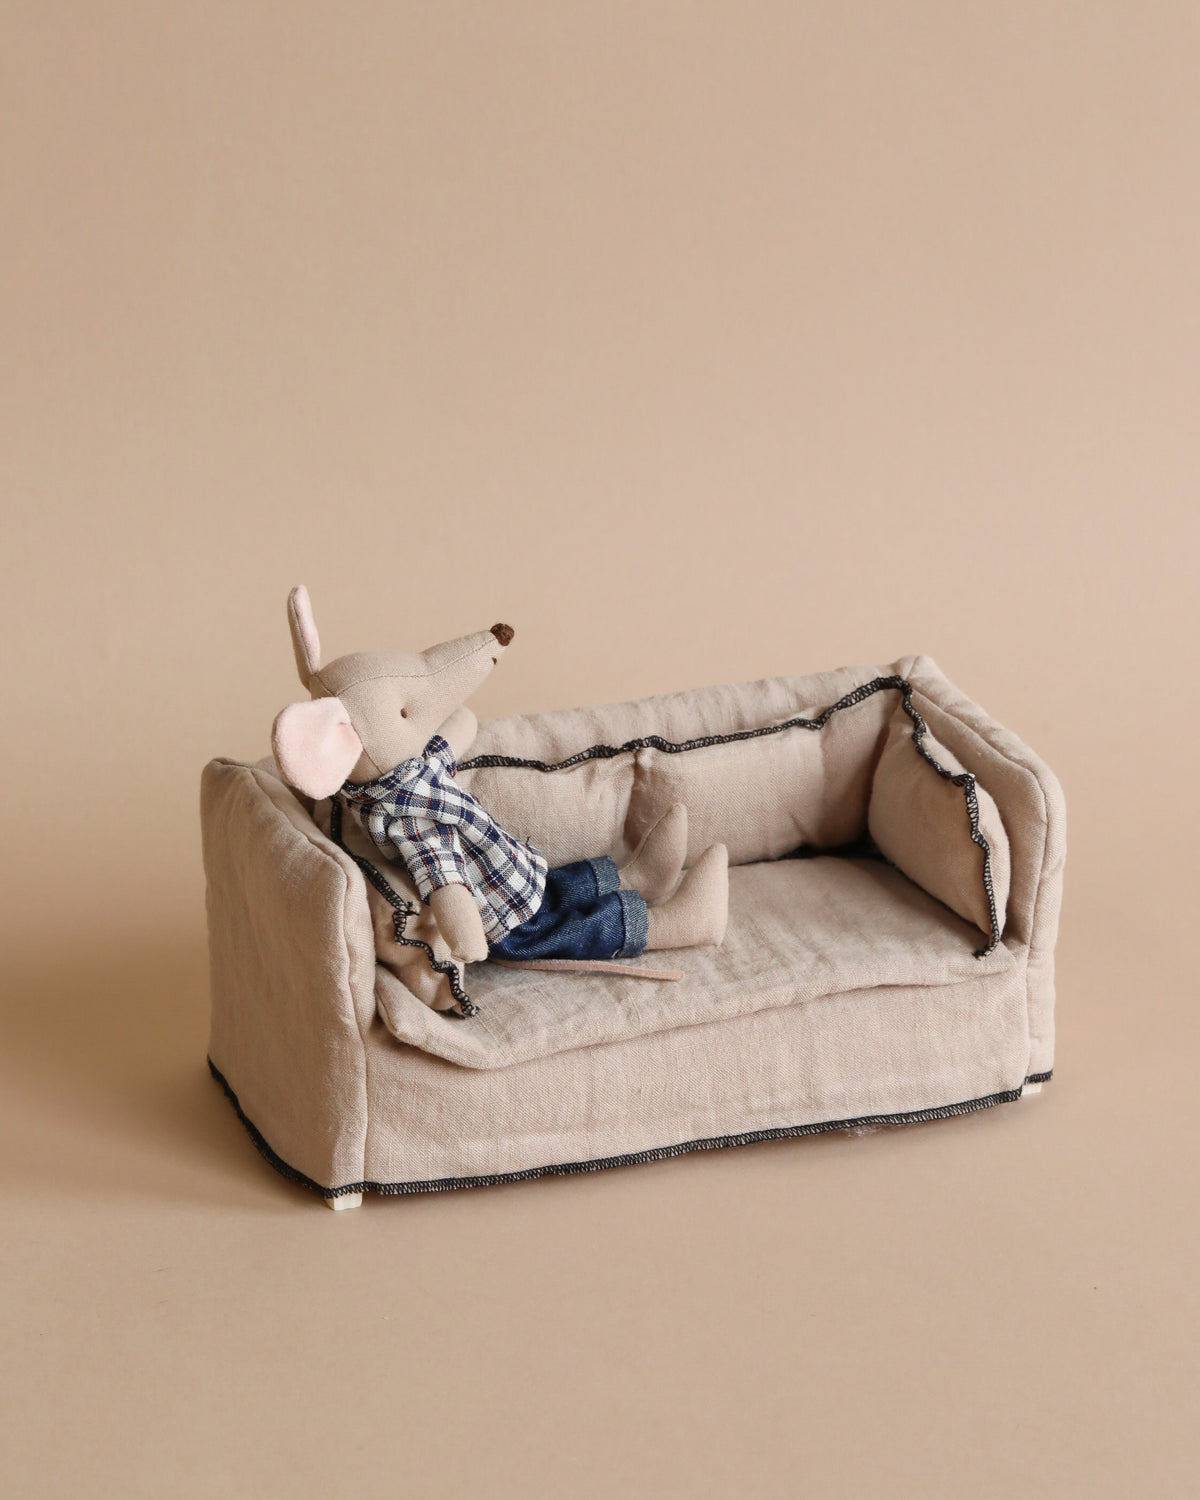 Couch, Miniature - Maileg USA